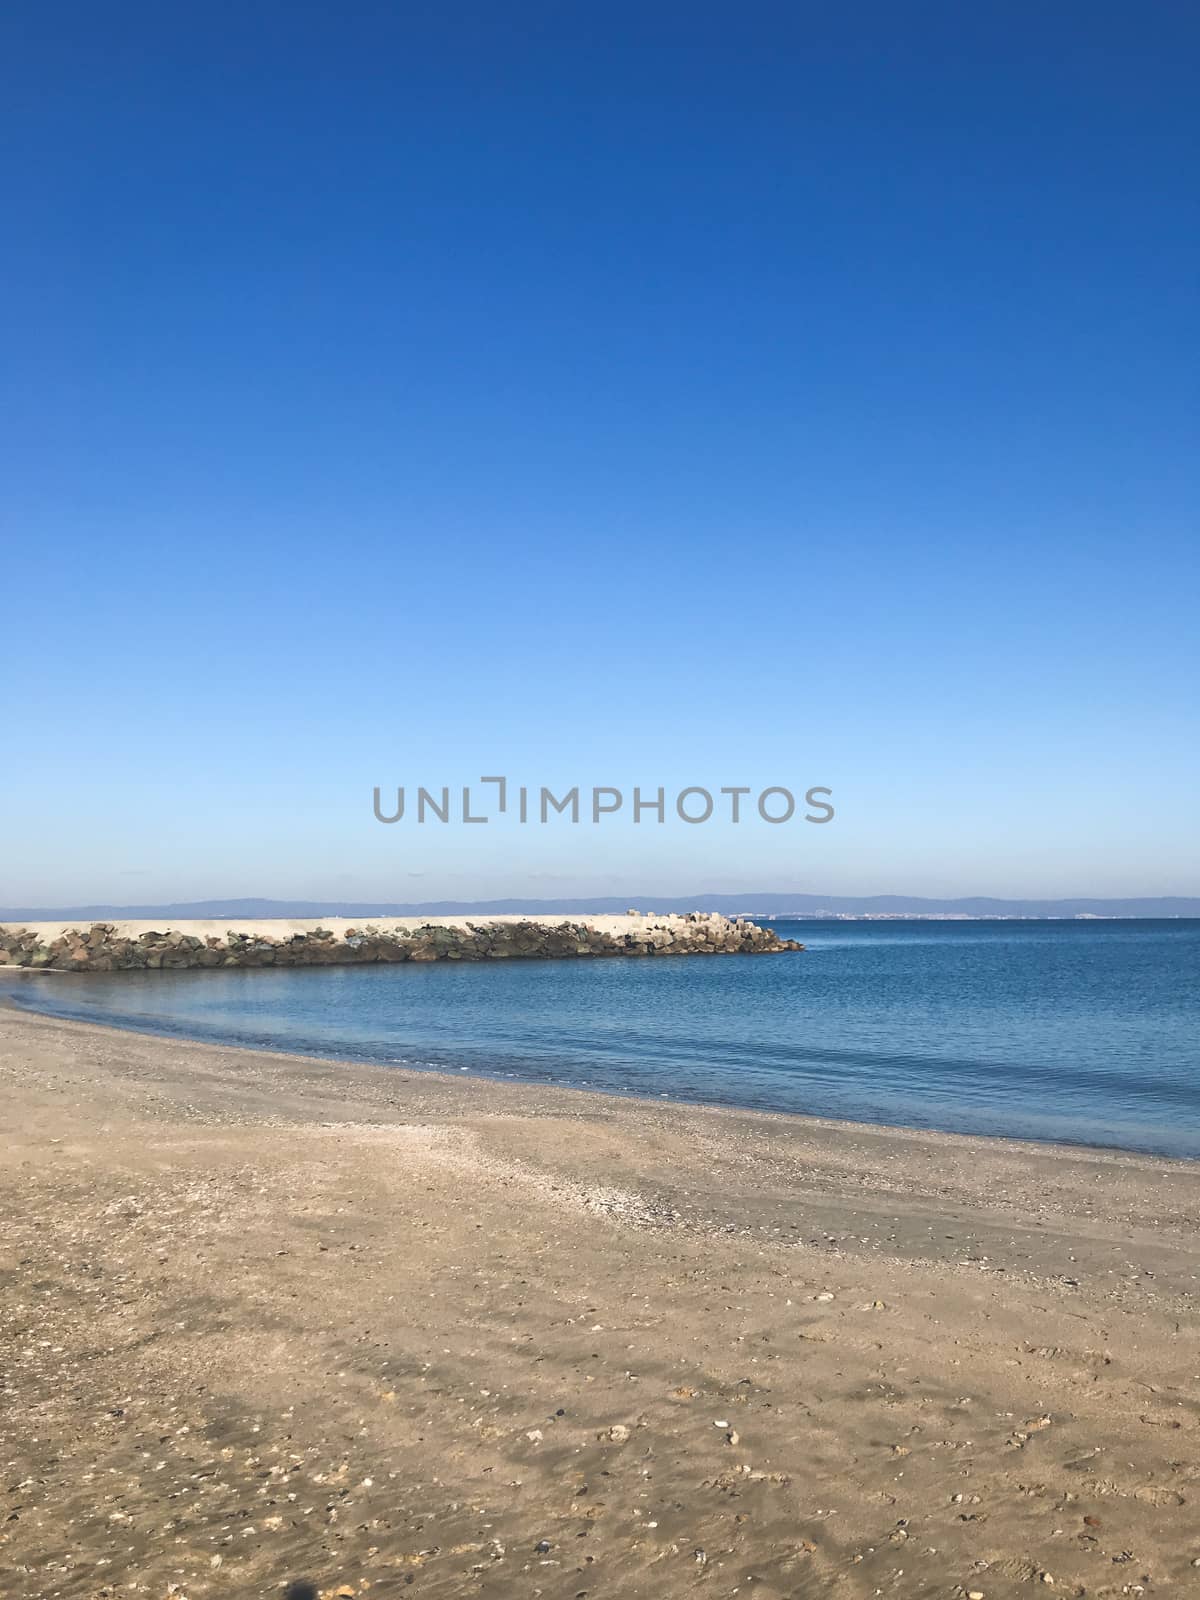 Scenic View Of Sea Against Clear Blue Sky and Sunlight